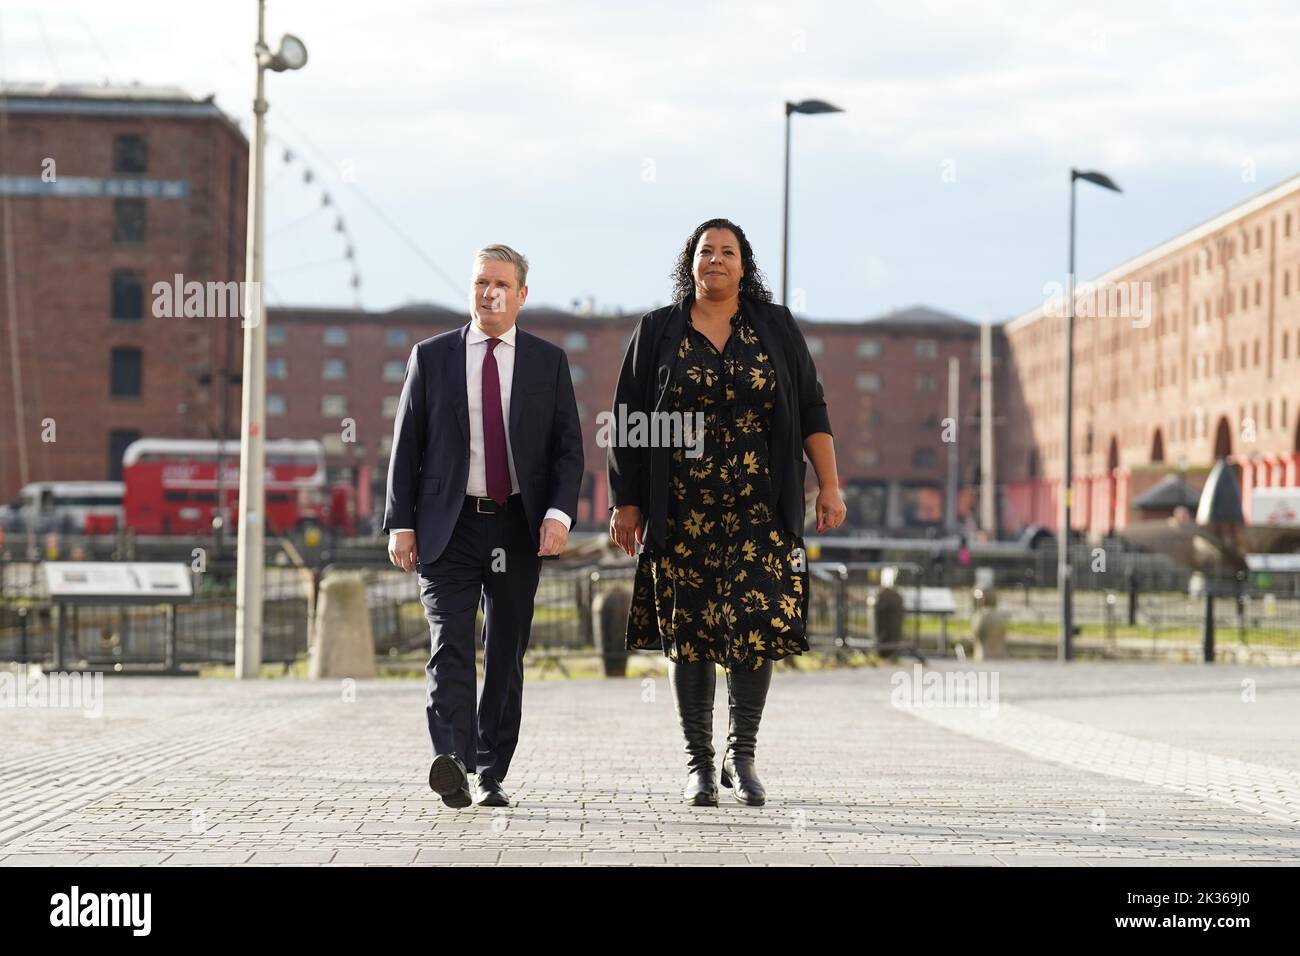 Labour party leader Sir Keir Starmer, arrives at the Museum of Liverpool, with the Mayor of Liverpool Joanne Anderson, to appear on the BBC1 current affairs programme, Sunday with Laura Kuenssberg, as the Labour Party Conference gets underway in Liverpool. Picture date: Sunday September 25, 2022. See PA story POLITICS Labour. Photo credit should read: Stefan Rousseau/PA Wire Stock Photo